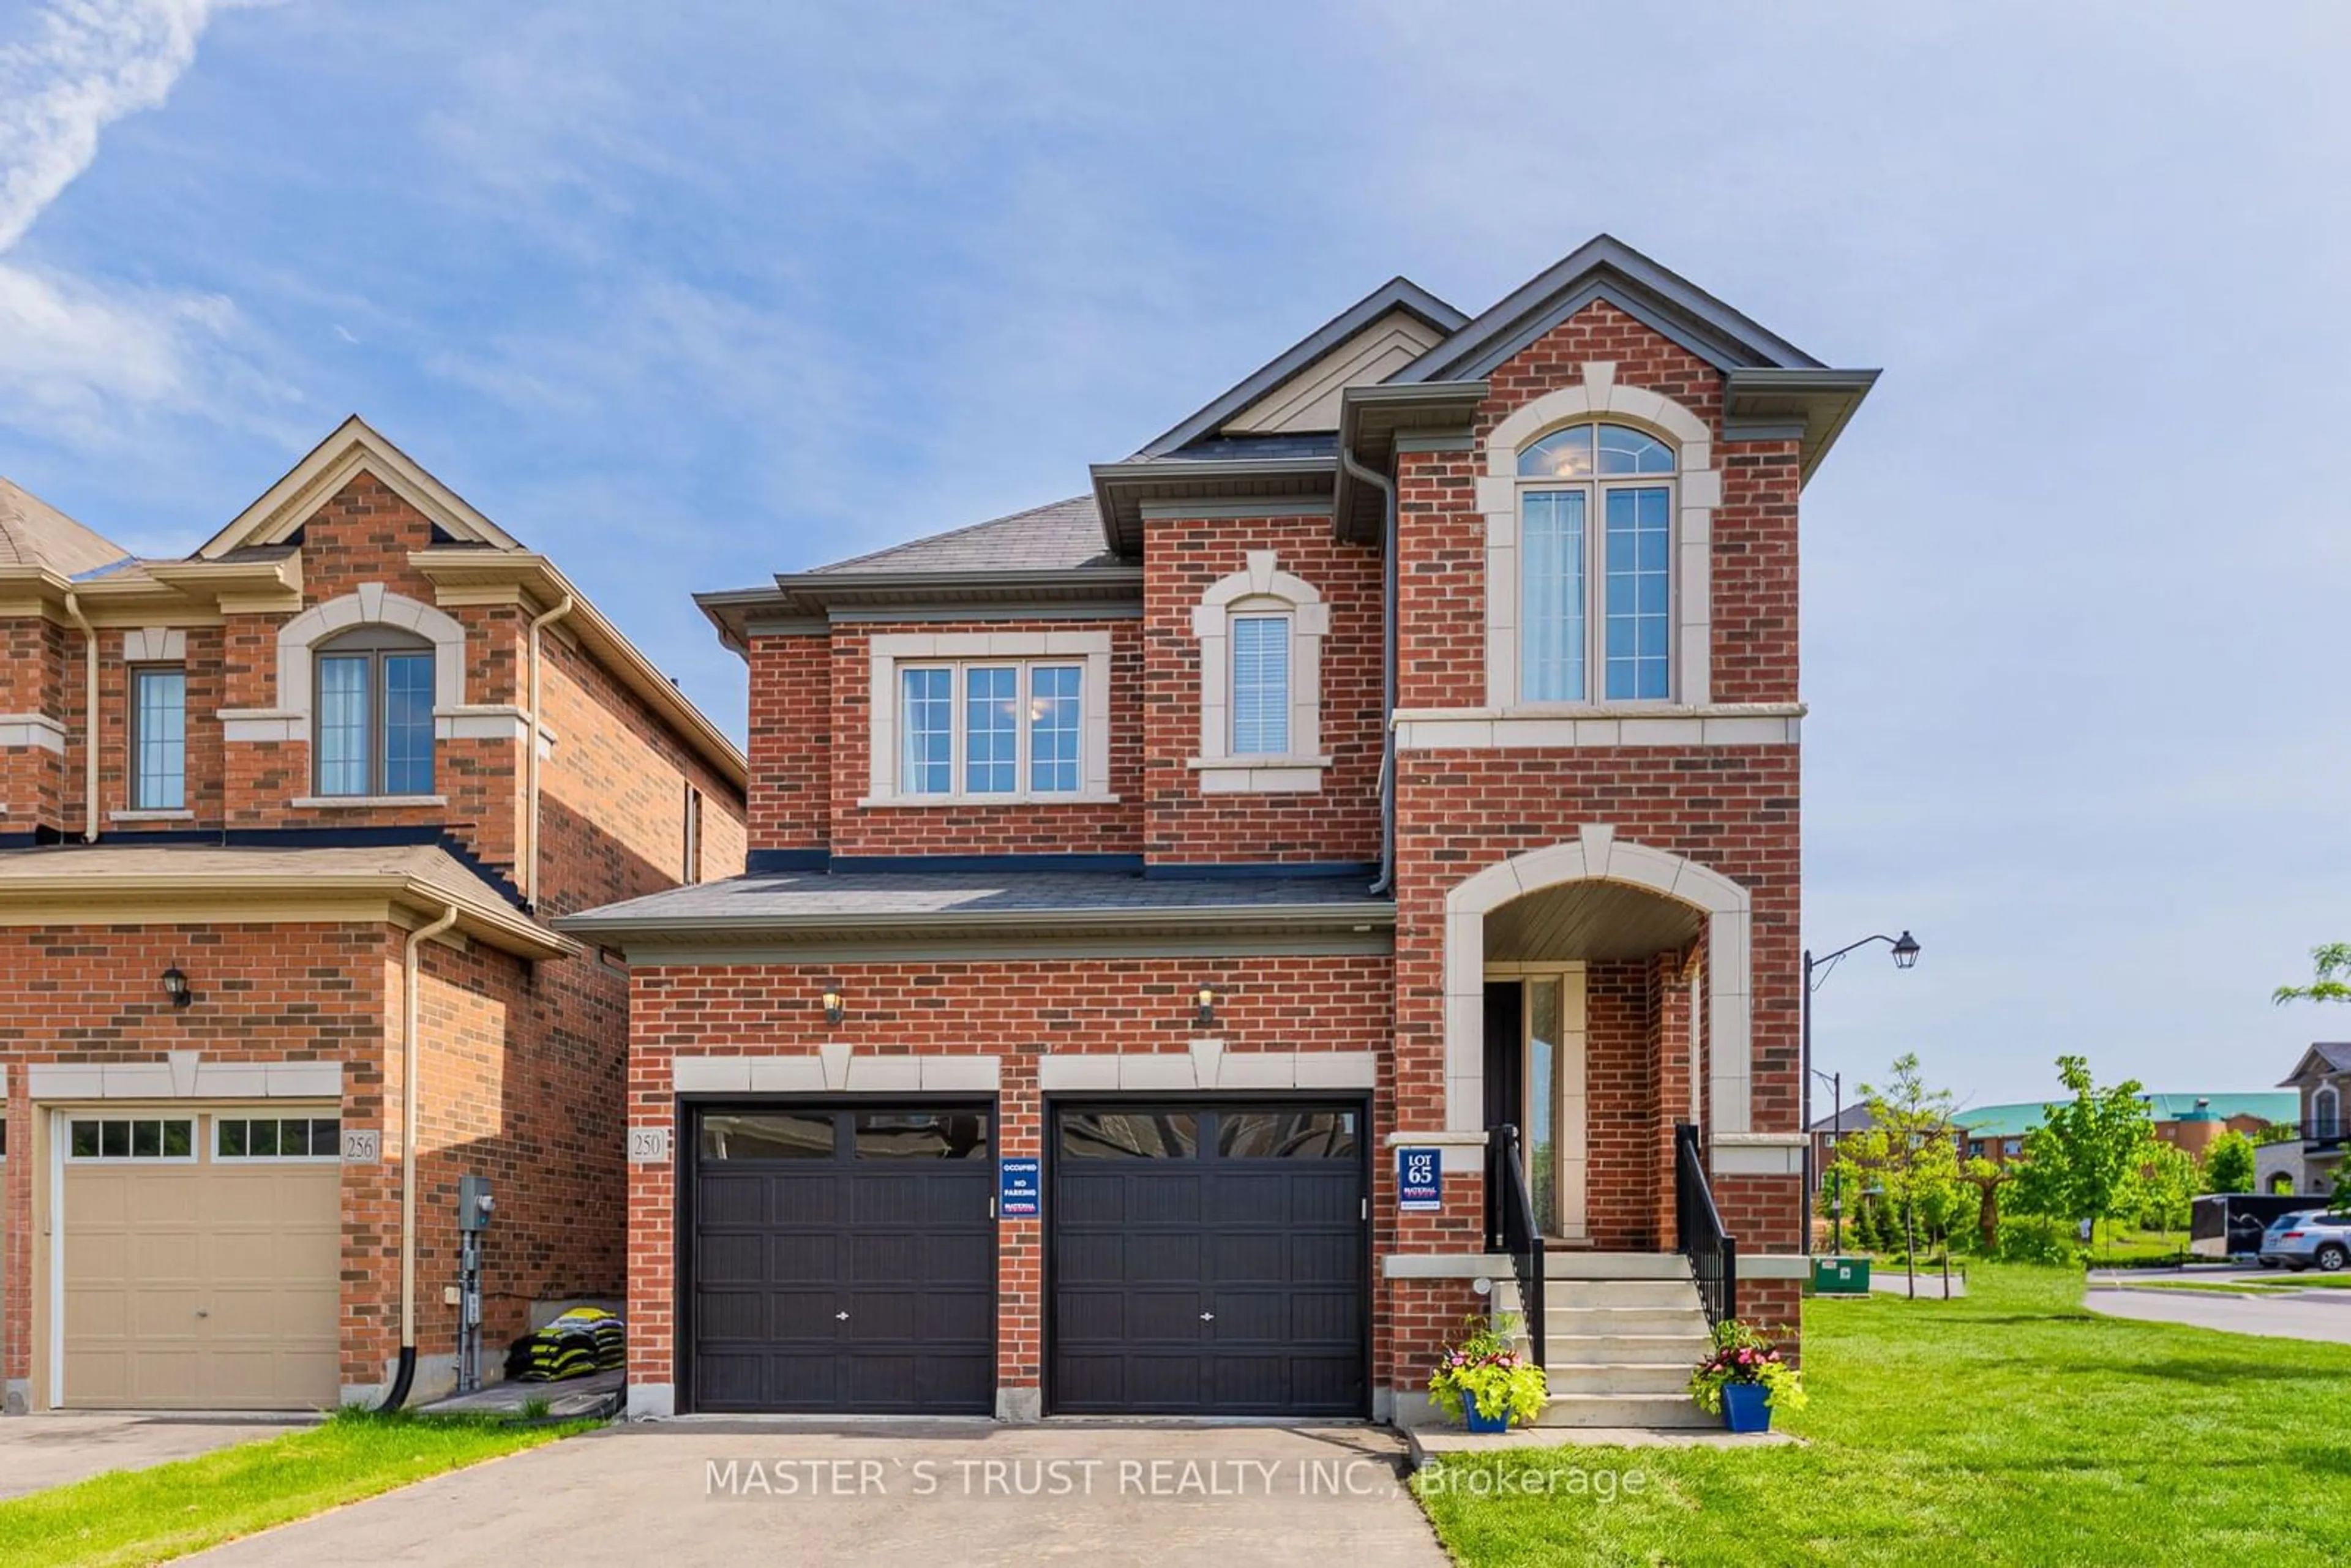 Home with brick exterior material for 250 Mickleburgh Dr, Newmarket Ontario L3X 2S2